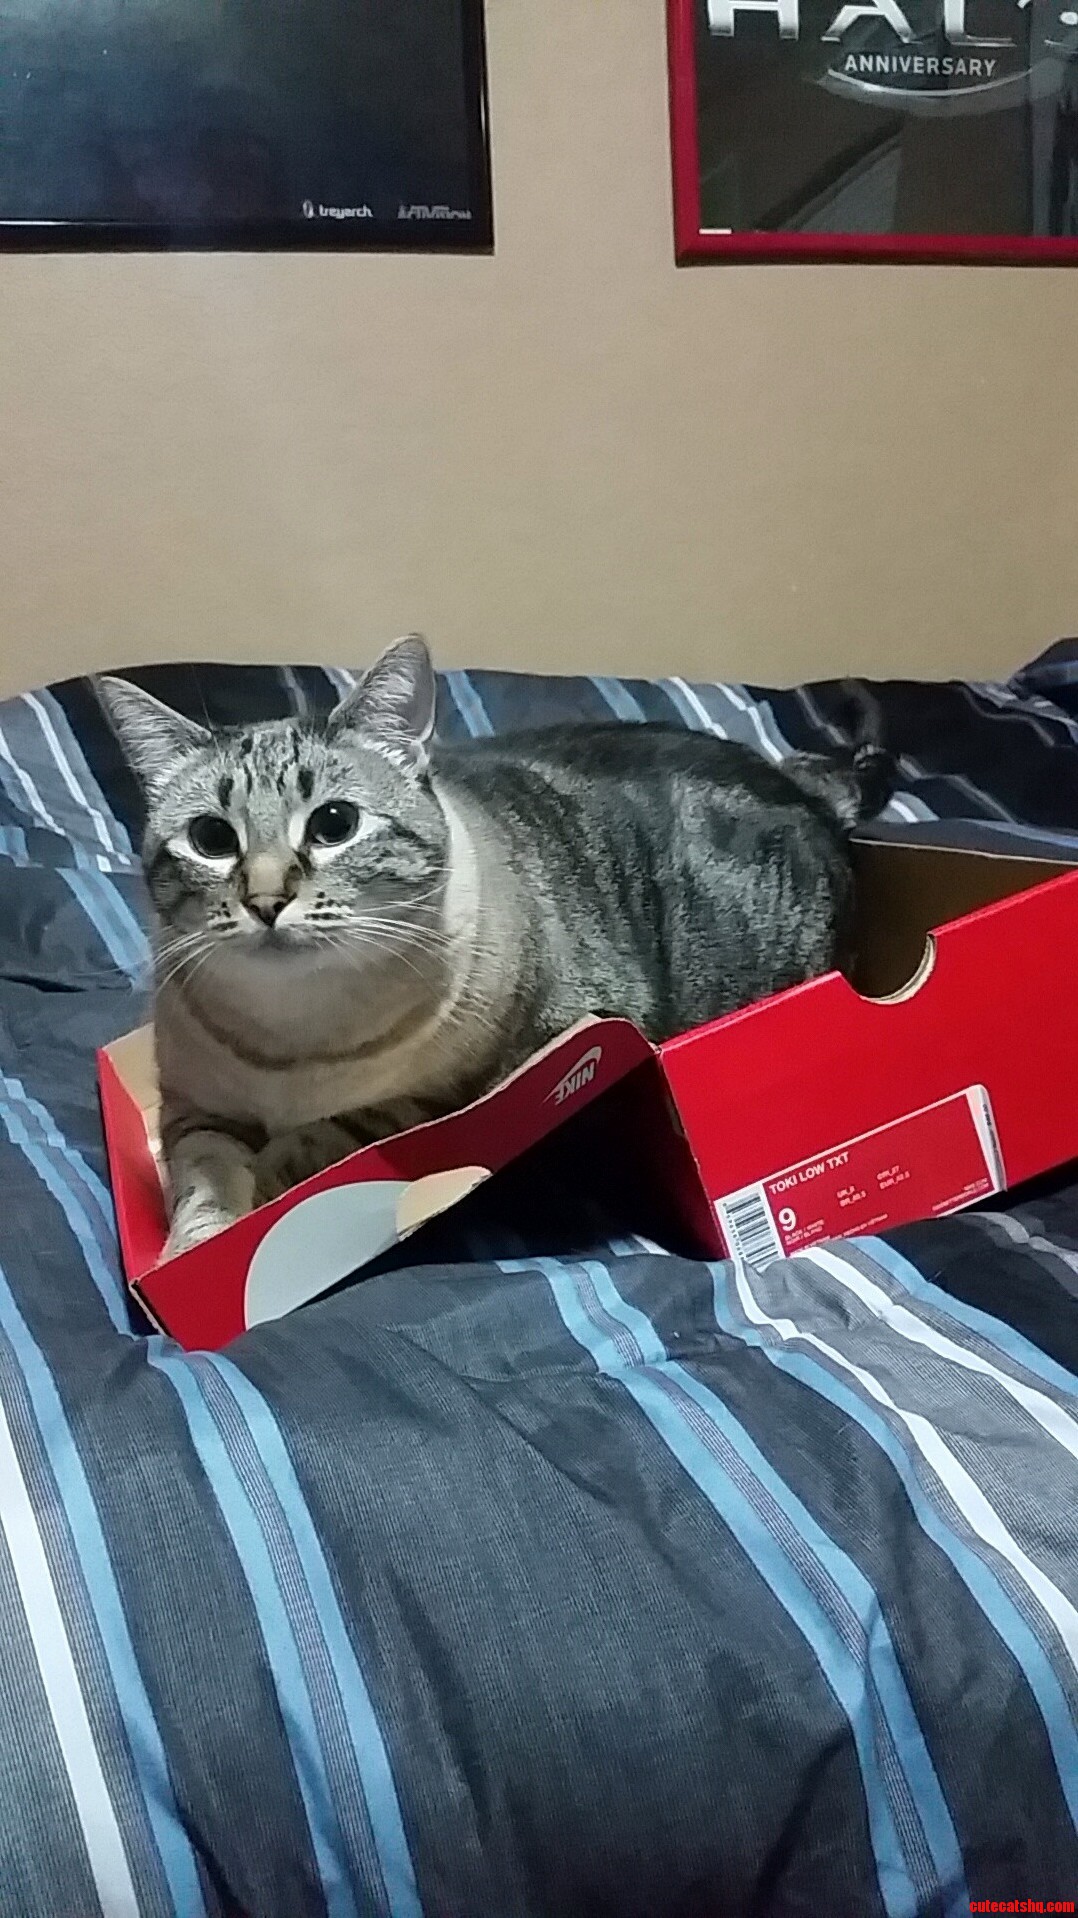 My cat thinks she can fit in a nike shoe box…